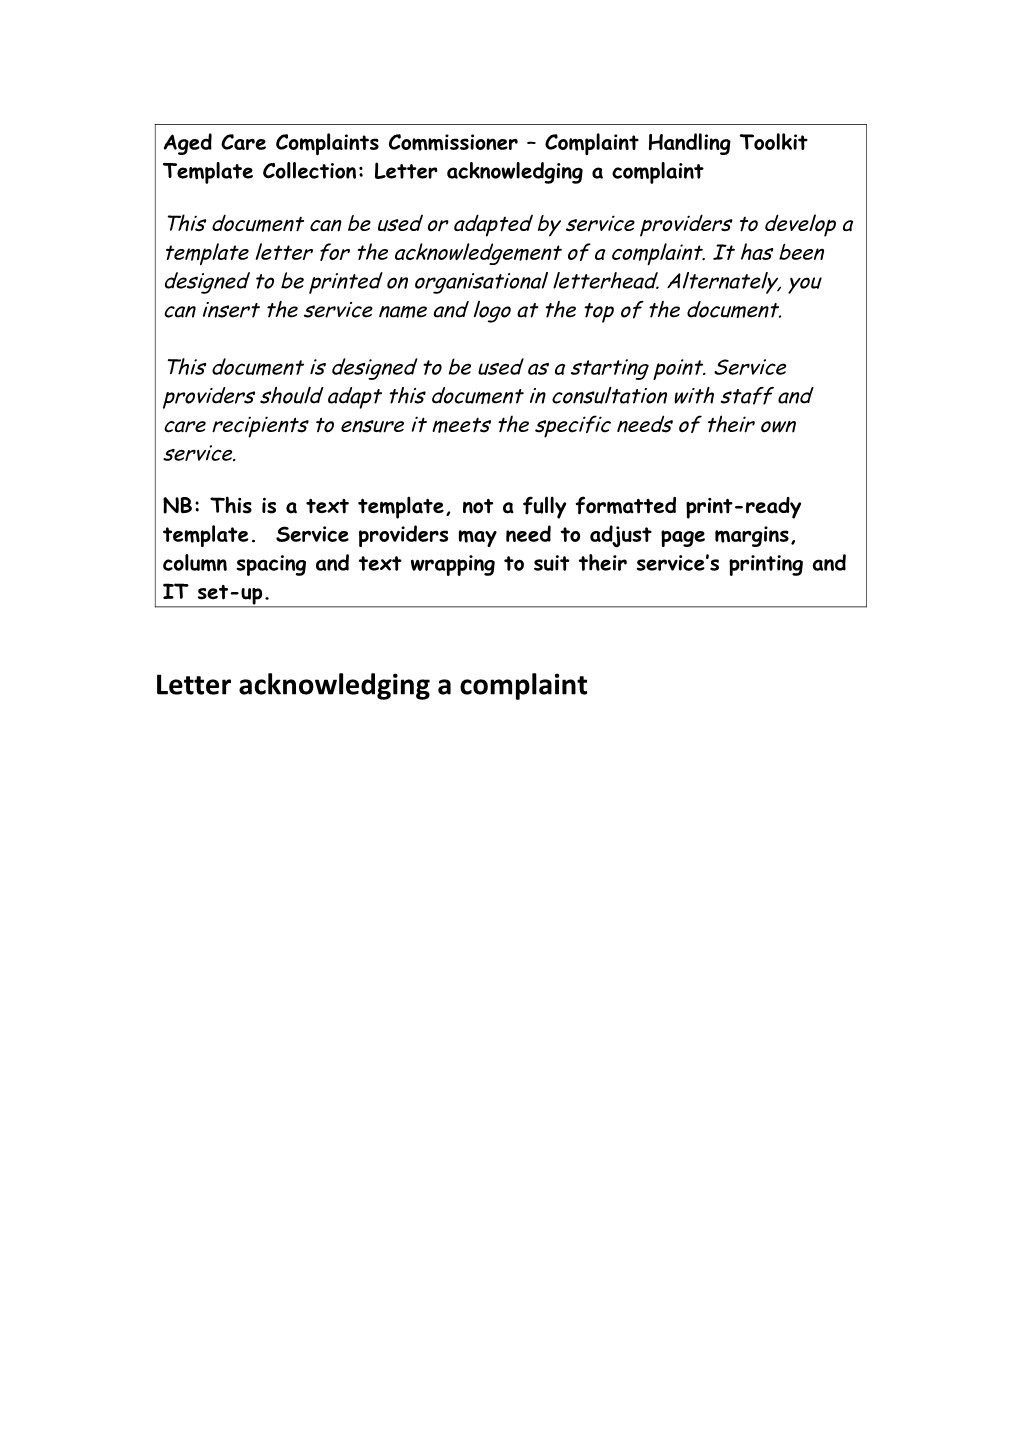 Aged Care Complaints Commissioner Complaint Handling Toolkit Template Collection: Letter